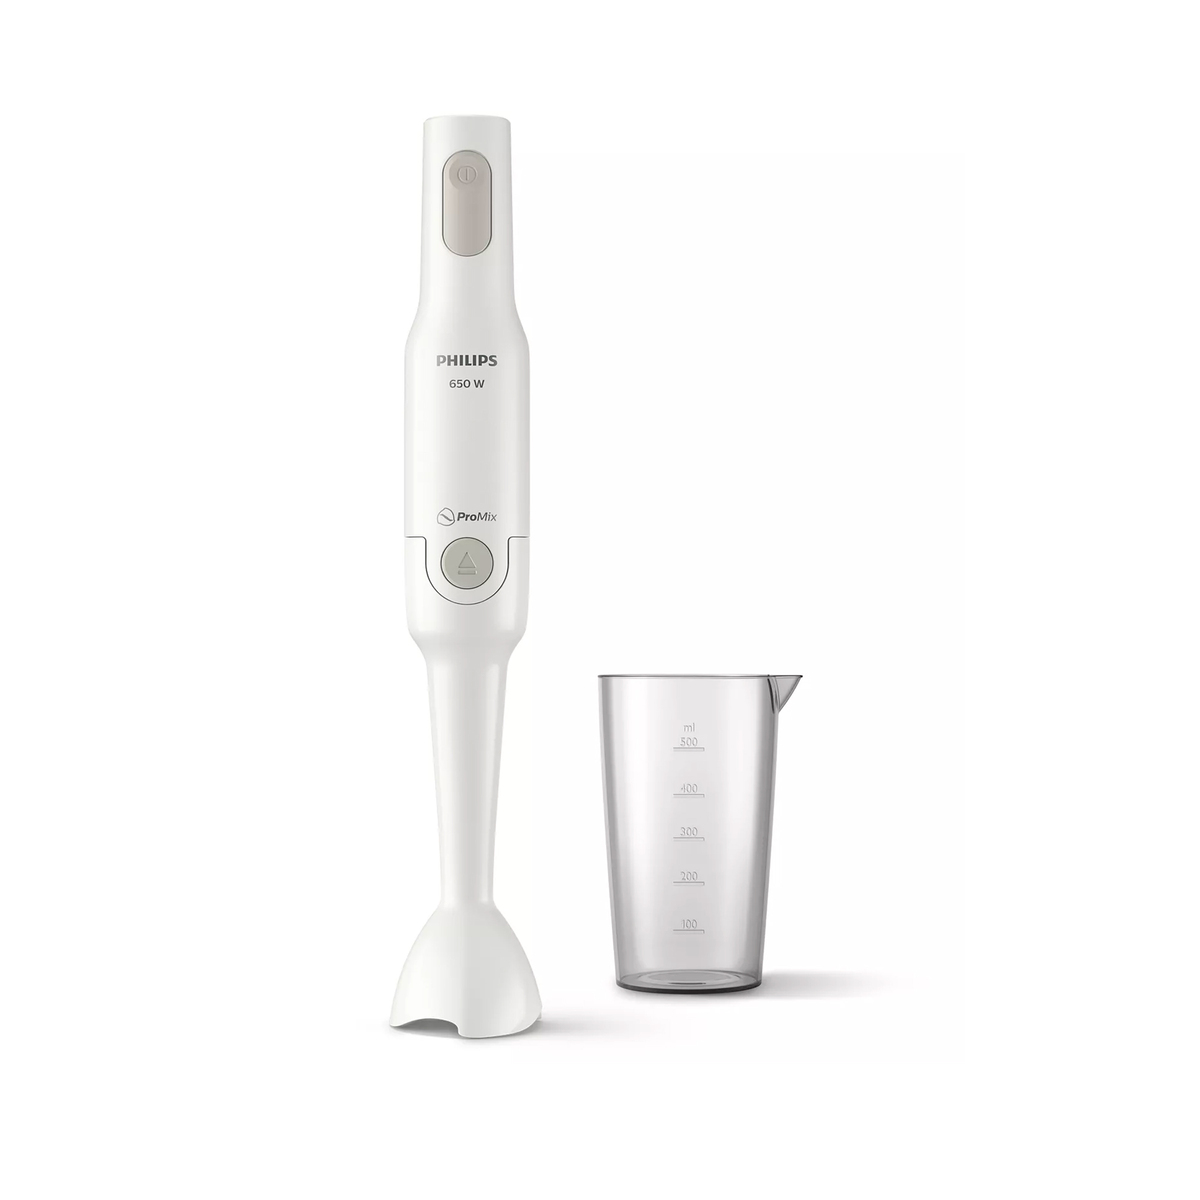 Philips Daily Collection ProMix Handblender, 650 W, White, HR2531 01